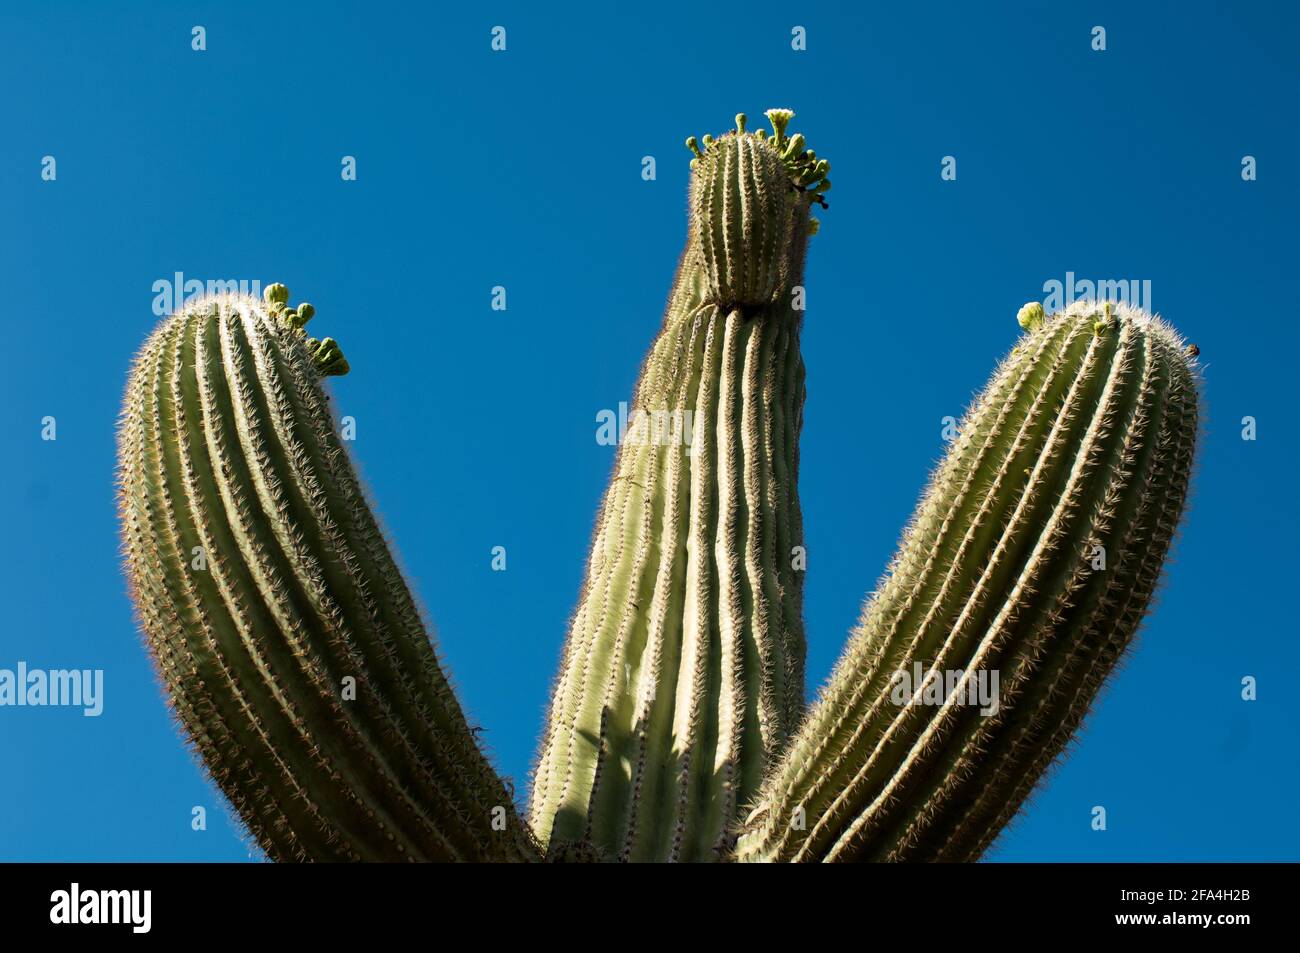 The saguaro, Carnegia gigantea is a cactus from the Arizona Sonora Desert. Is considered the king of the cactus, grows slowly, could live 200 years, c Stock Photo